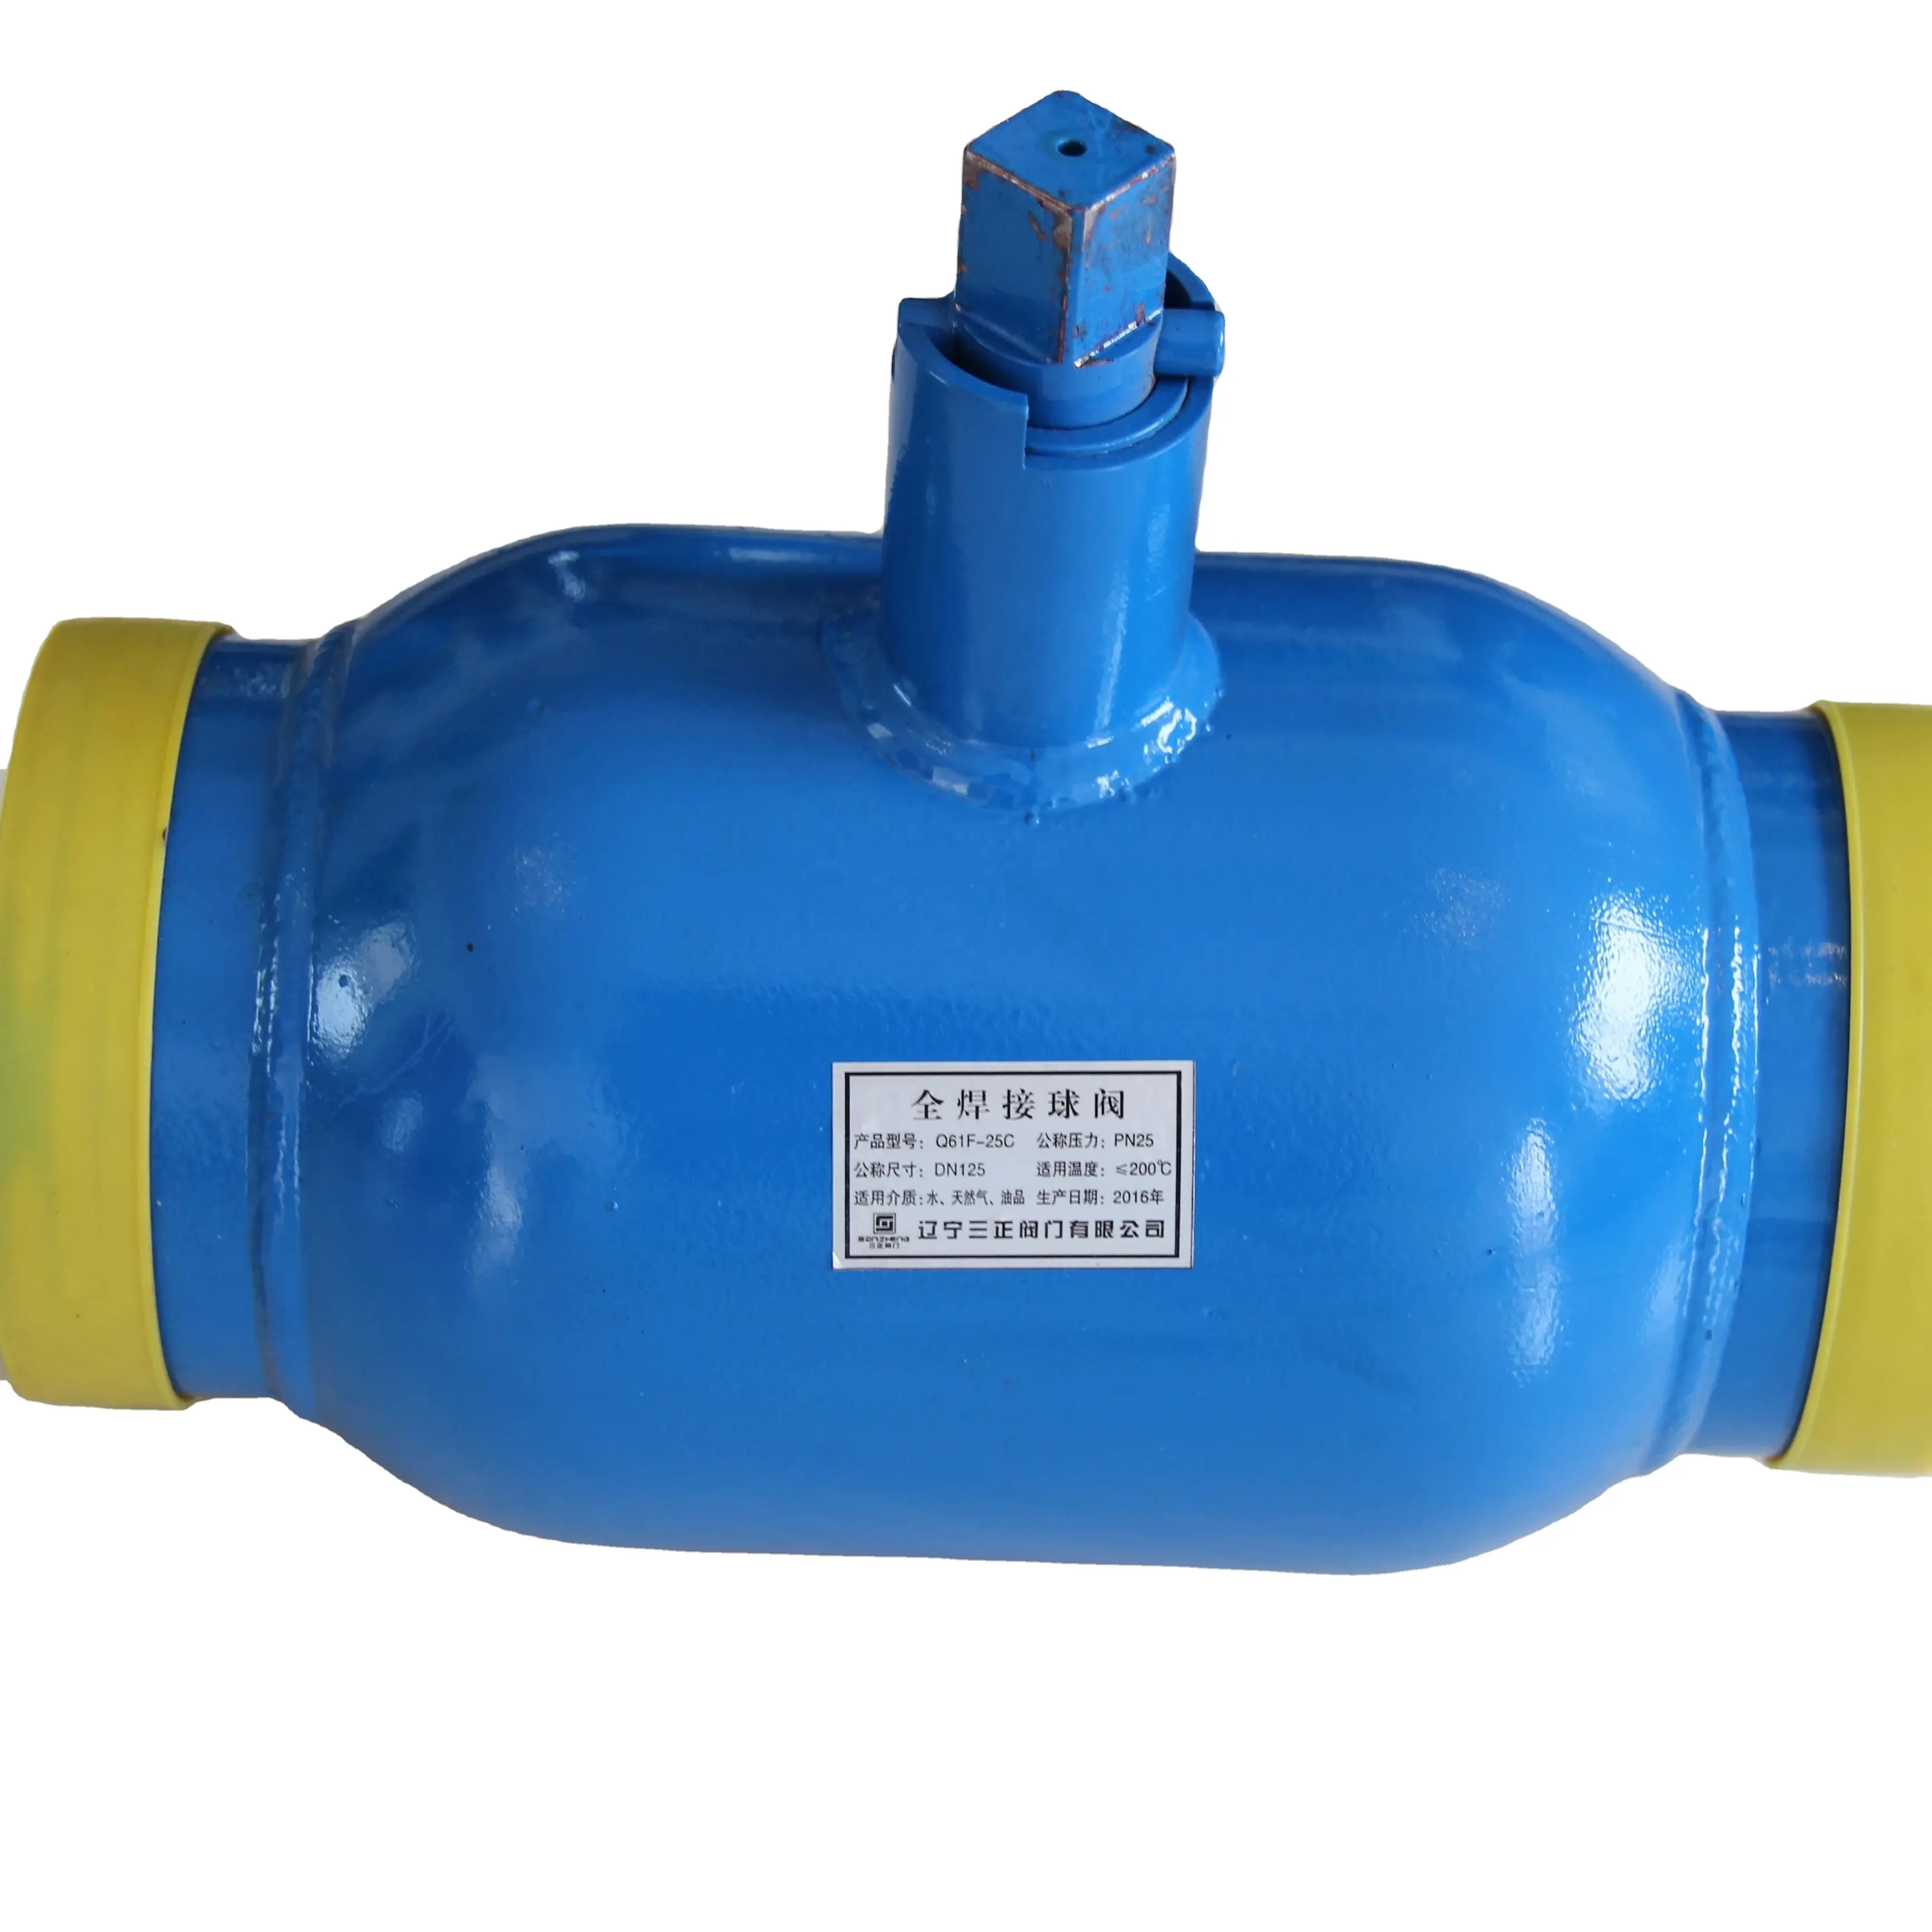 STAINLESS STEEL SOFT SEAL BALL VALVE Q61F DN 125 WATER/GAS WITH LOW PRESSURE MEDIUM TEMPERATURE PRODUCED IN LIAONING